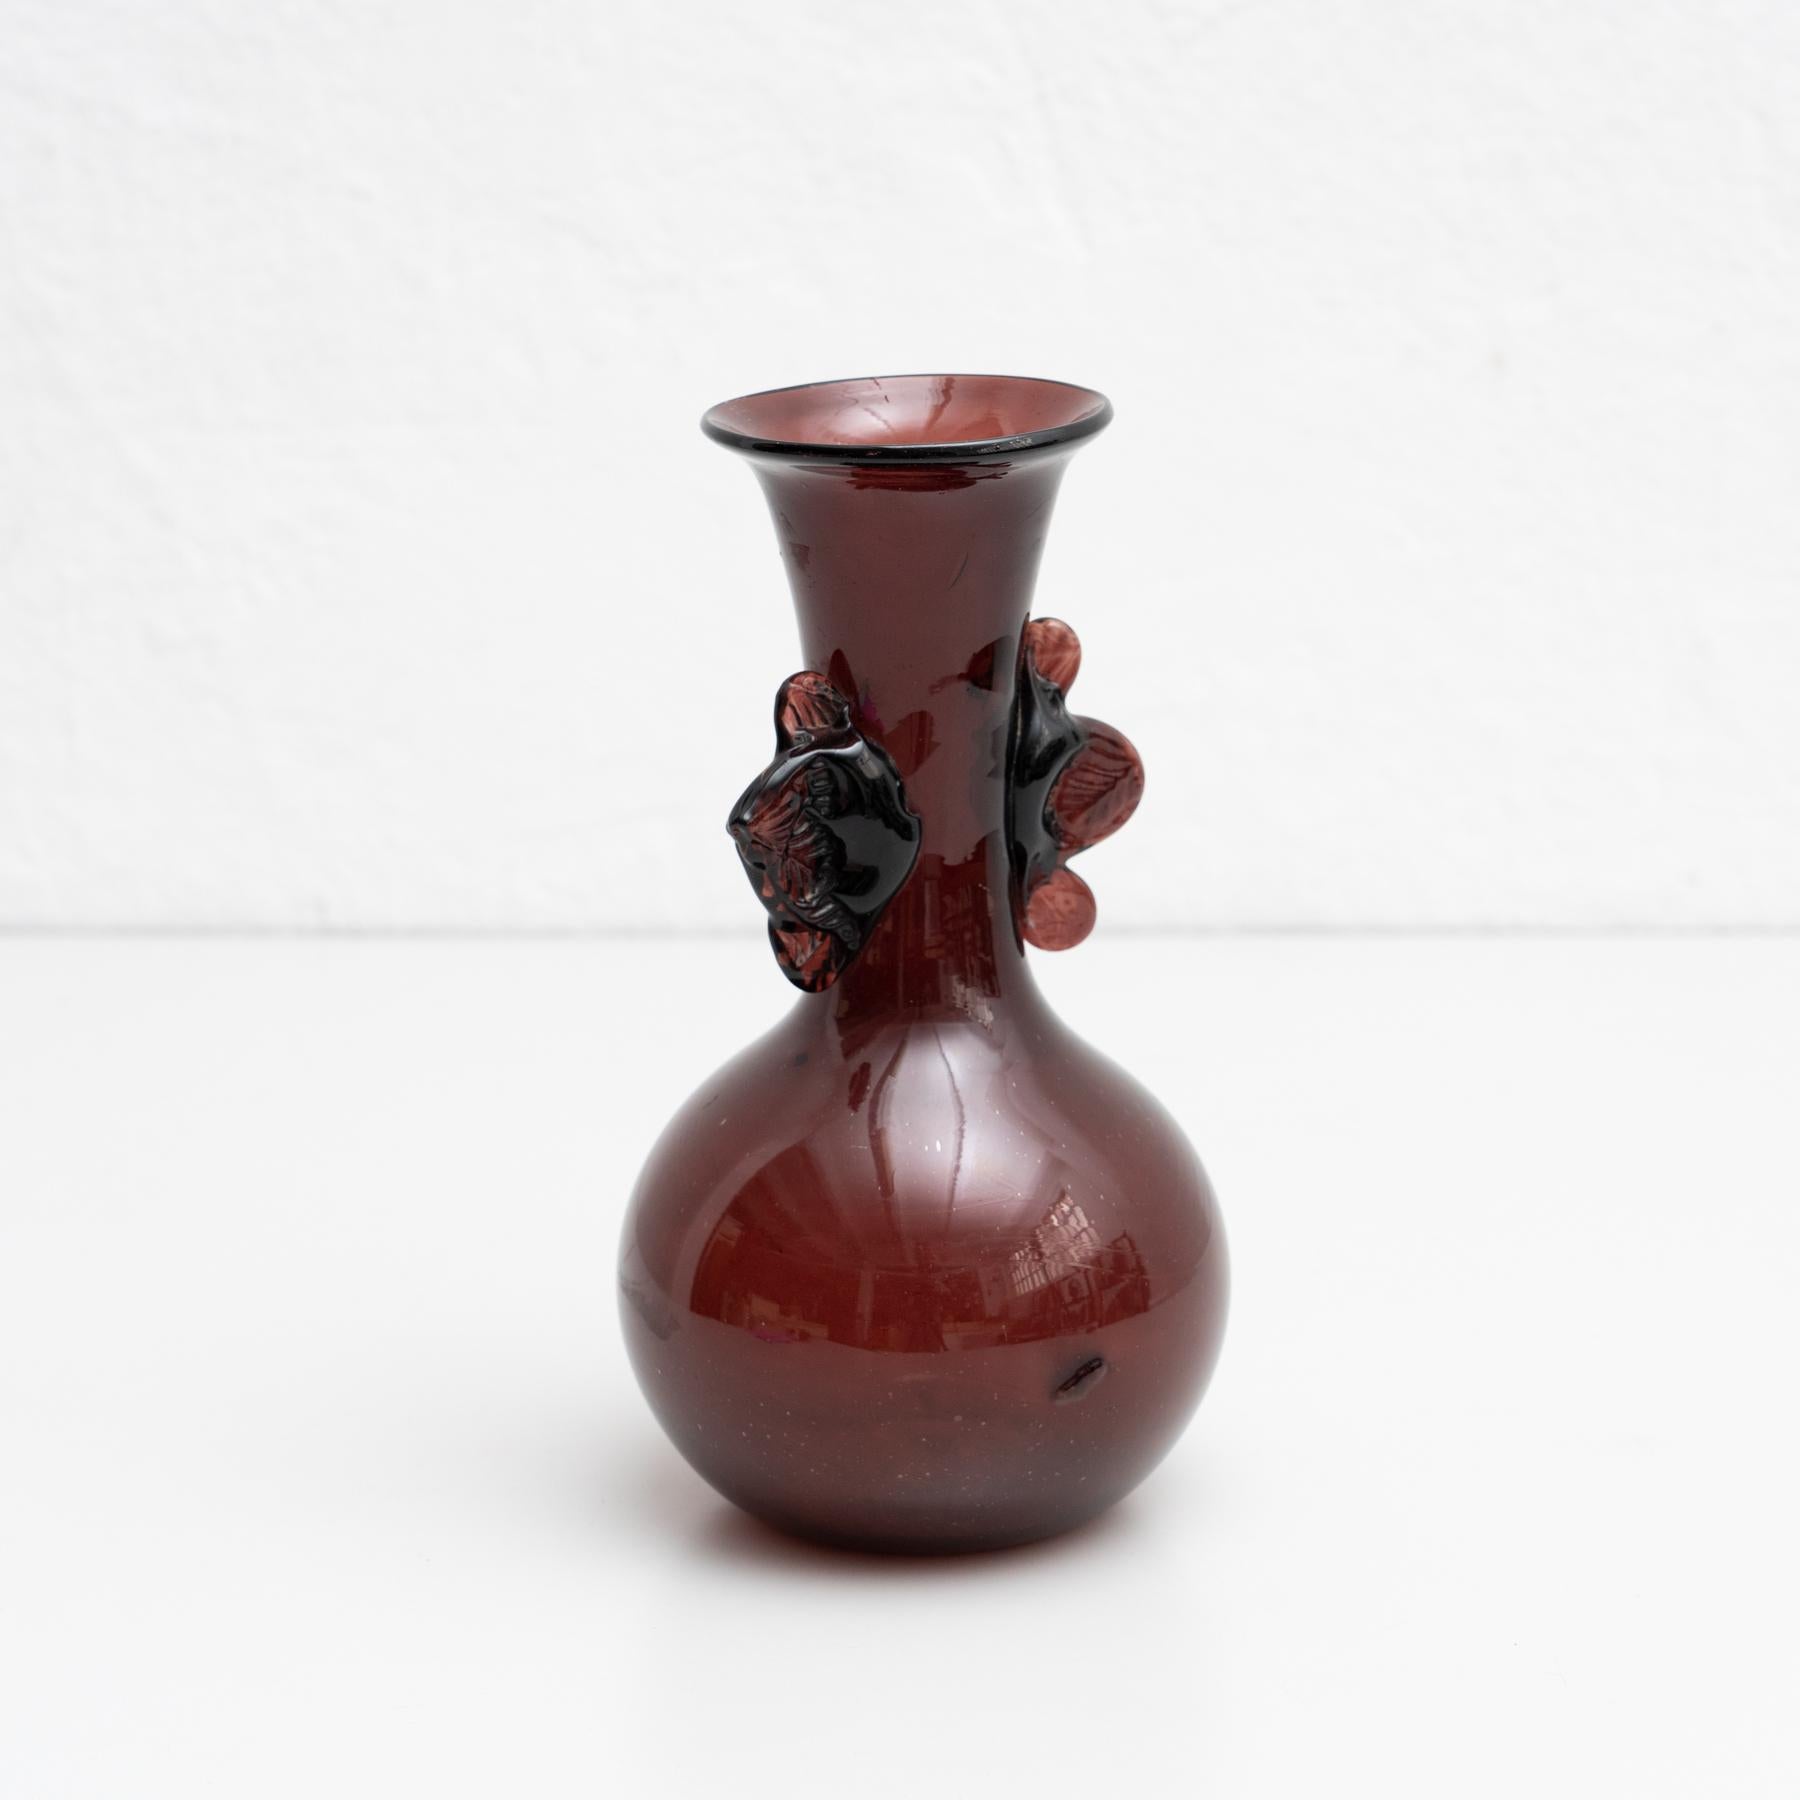 Antique murano glass flower vase.

Manufactured in Italy, circa 1970.

Embrace the allure of Italian craftsmanship with this exquisite Murano glass flower vase, manufactured in Italy circa 1970. This striking piece showcases the skill and artistry